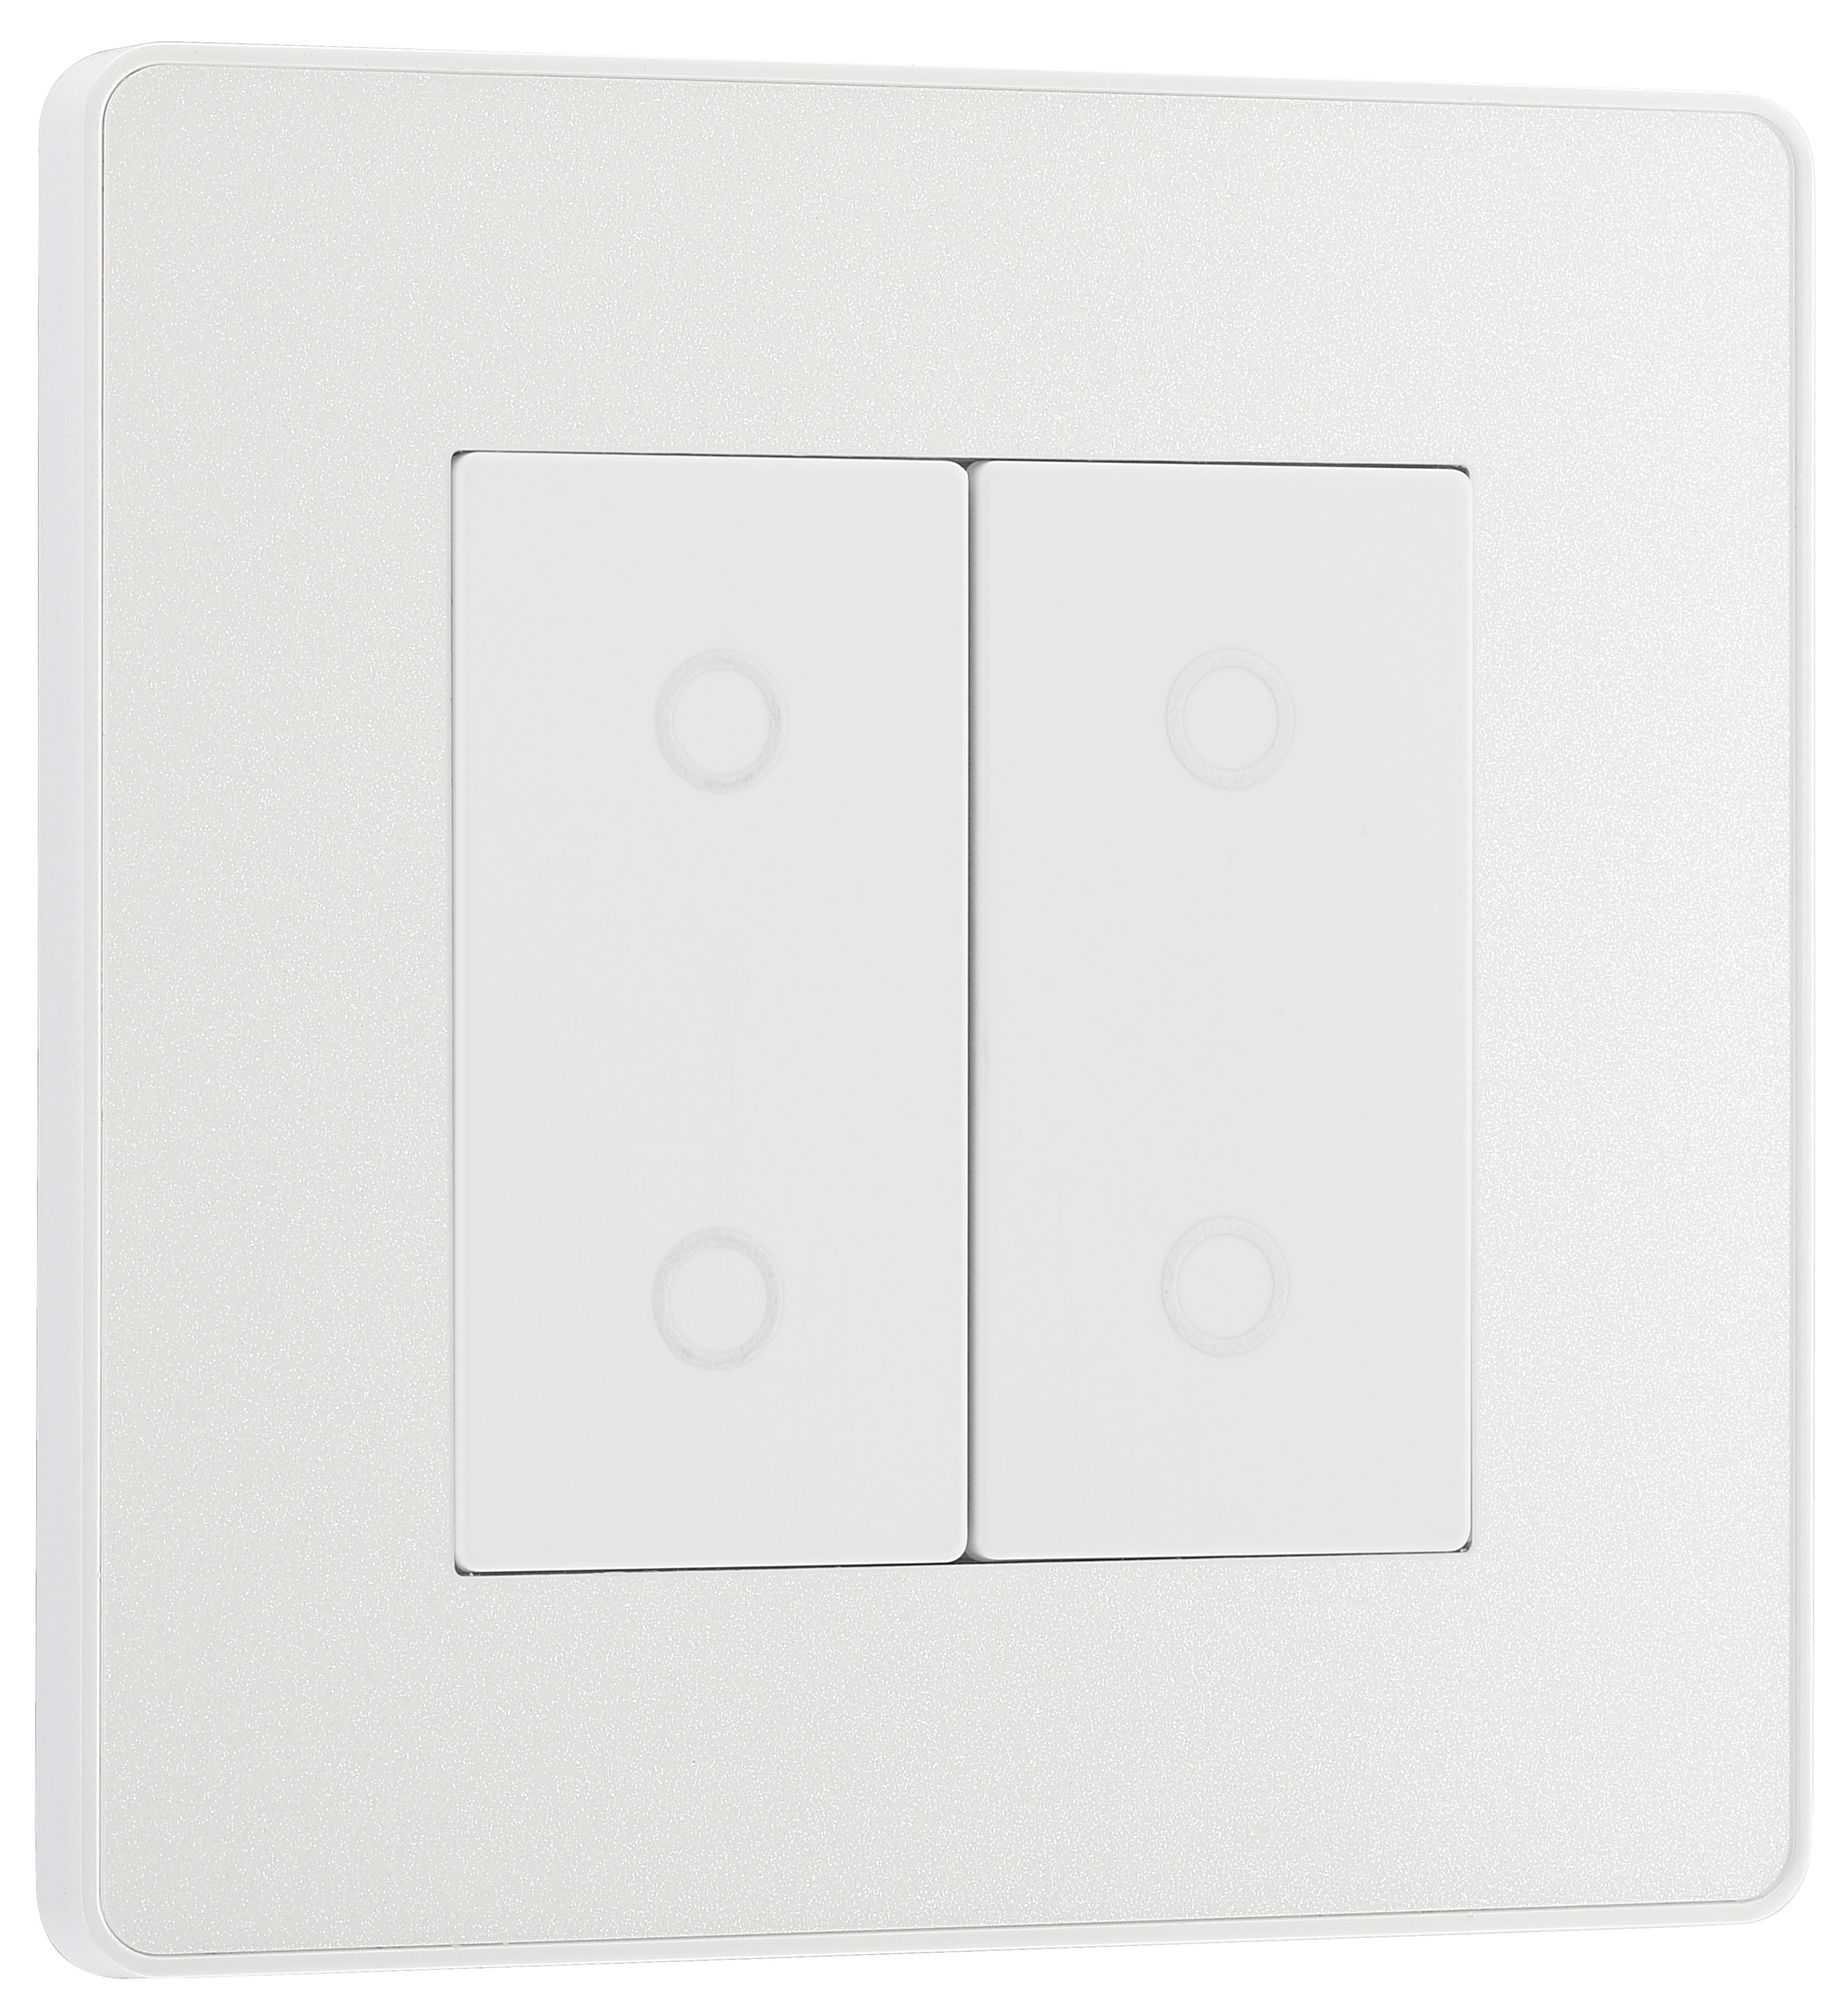 BG Evolve Pearlescent White 2 Way Master Double Touch Dimmer Switch - 200W